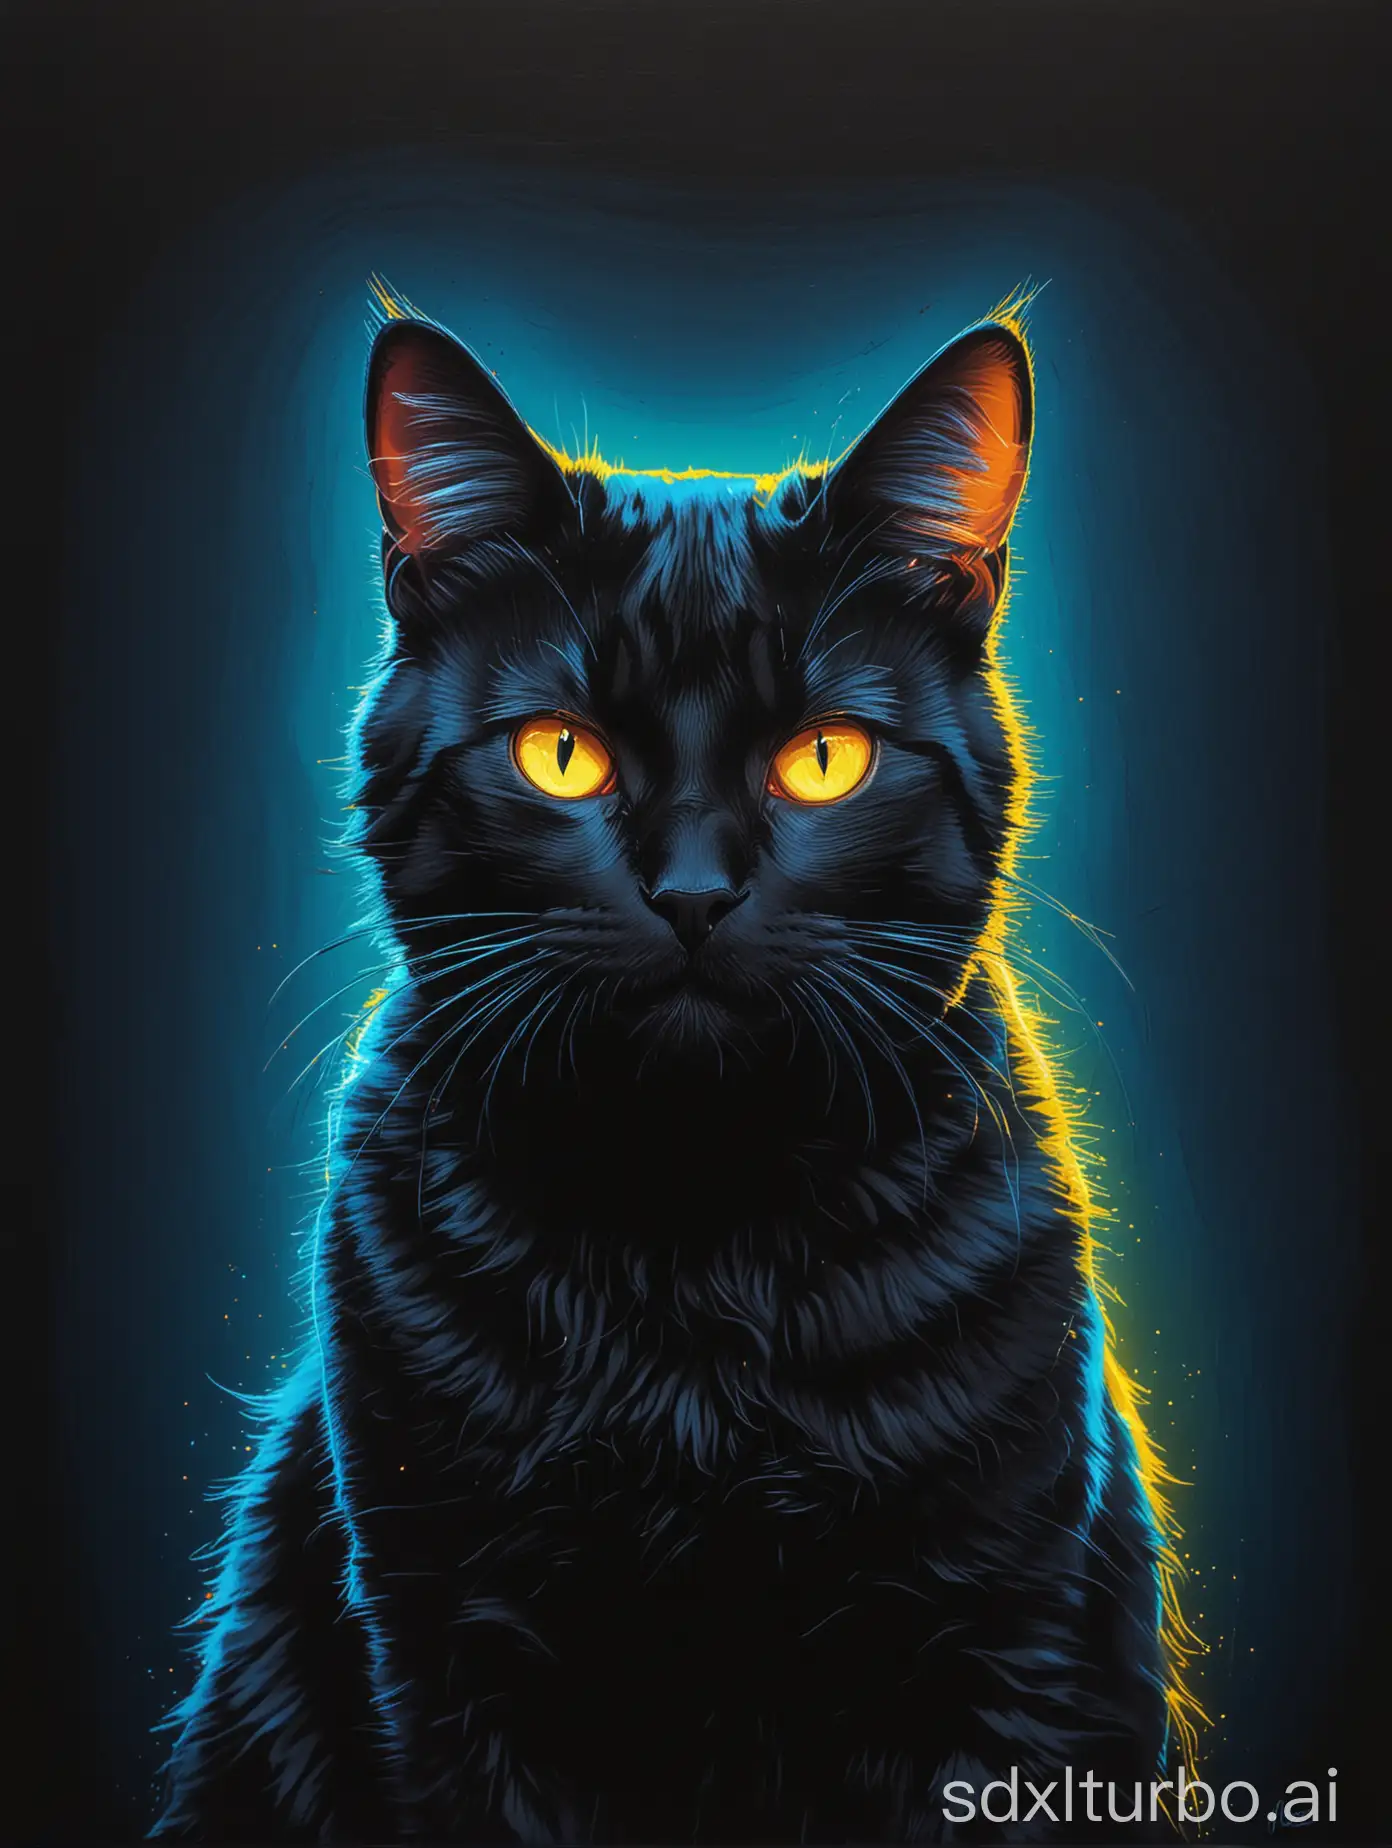 Cat, blue lighting, yellow glow in the background, drawing in the style of contemporary paintiner, neon colors, black background 